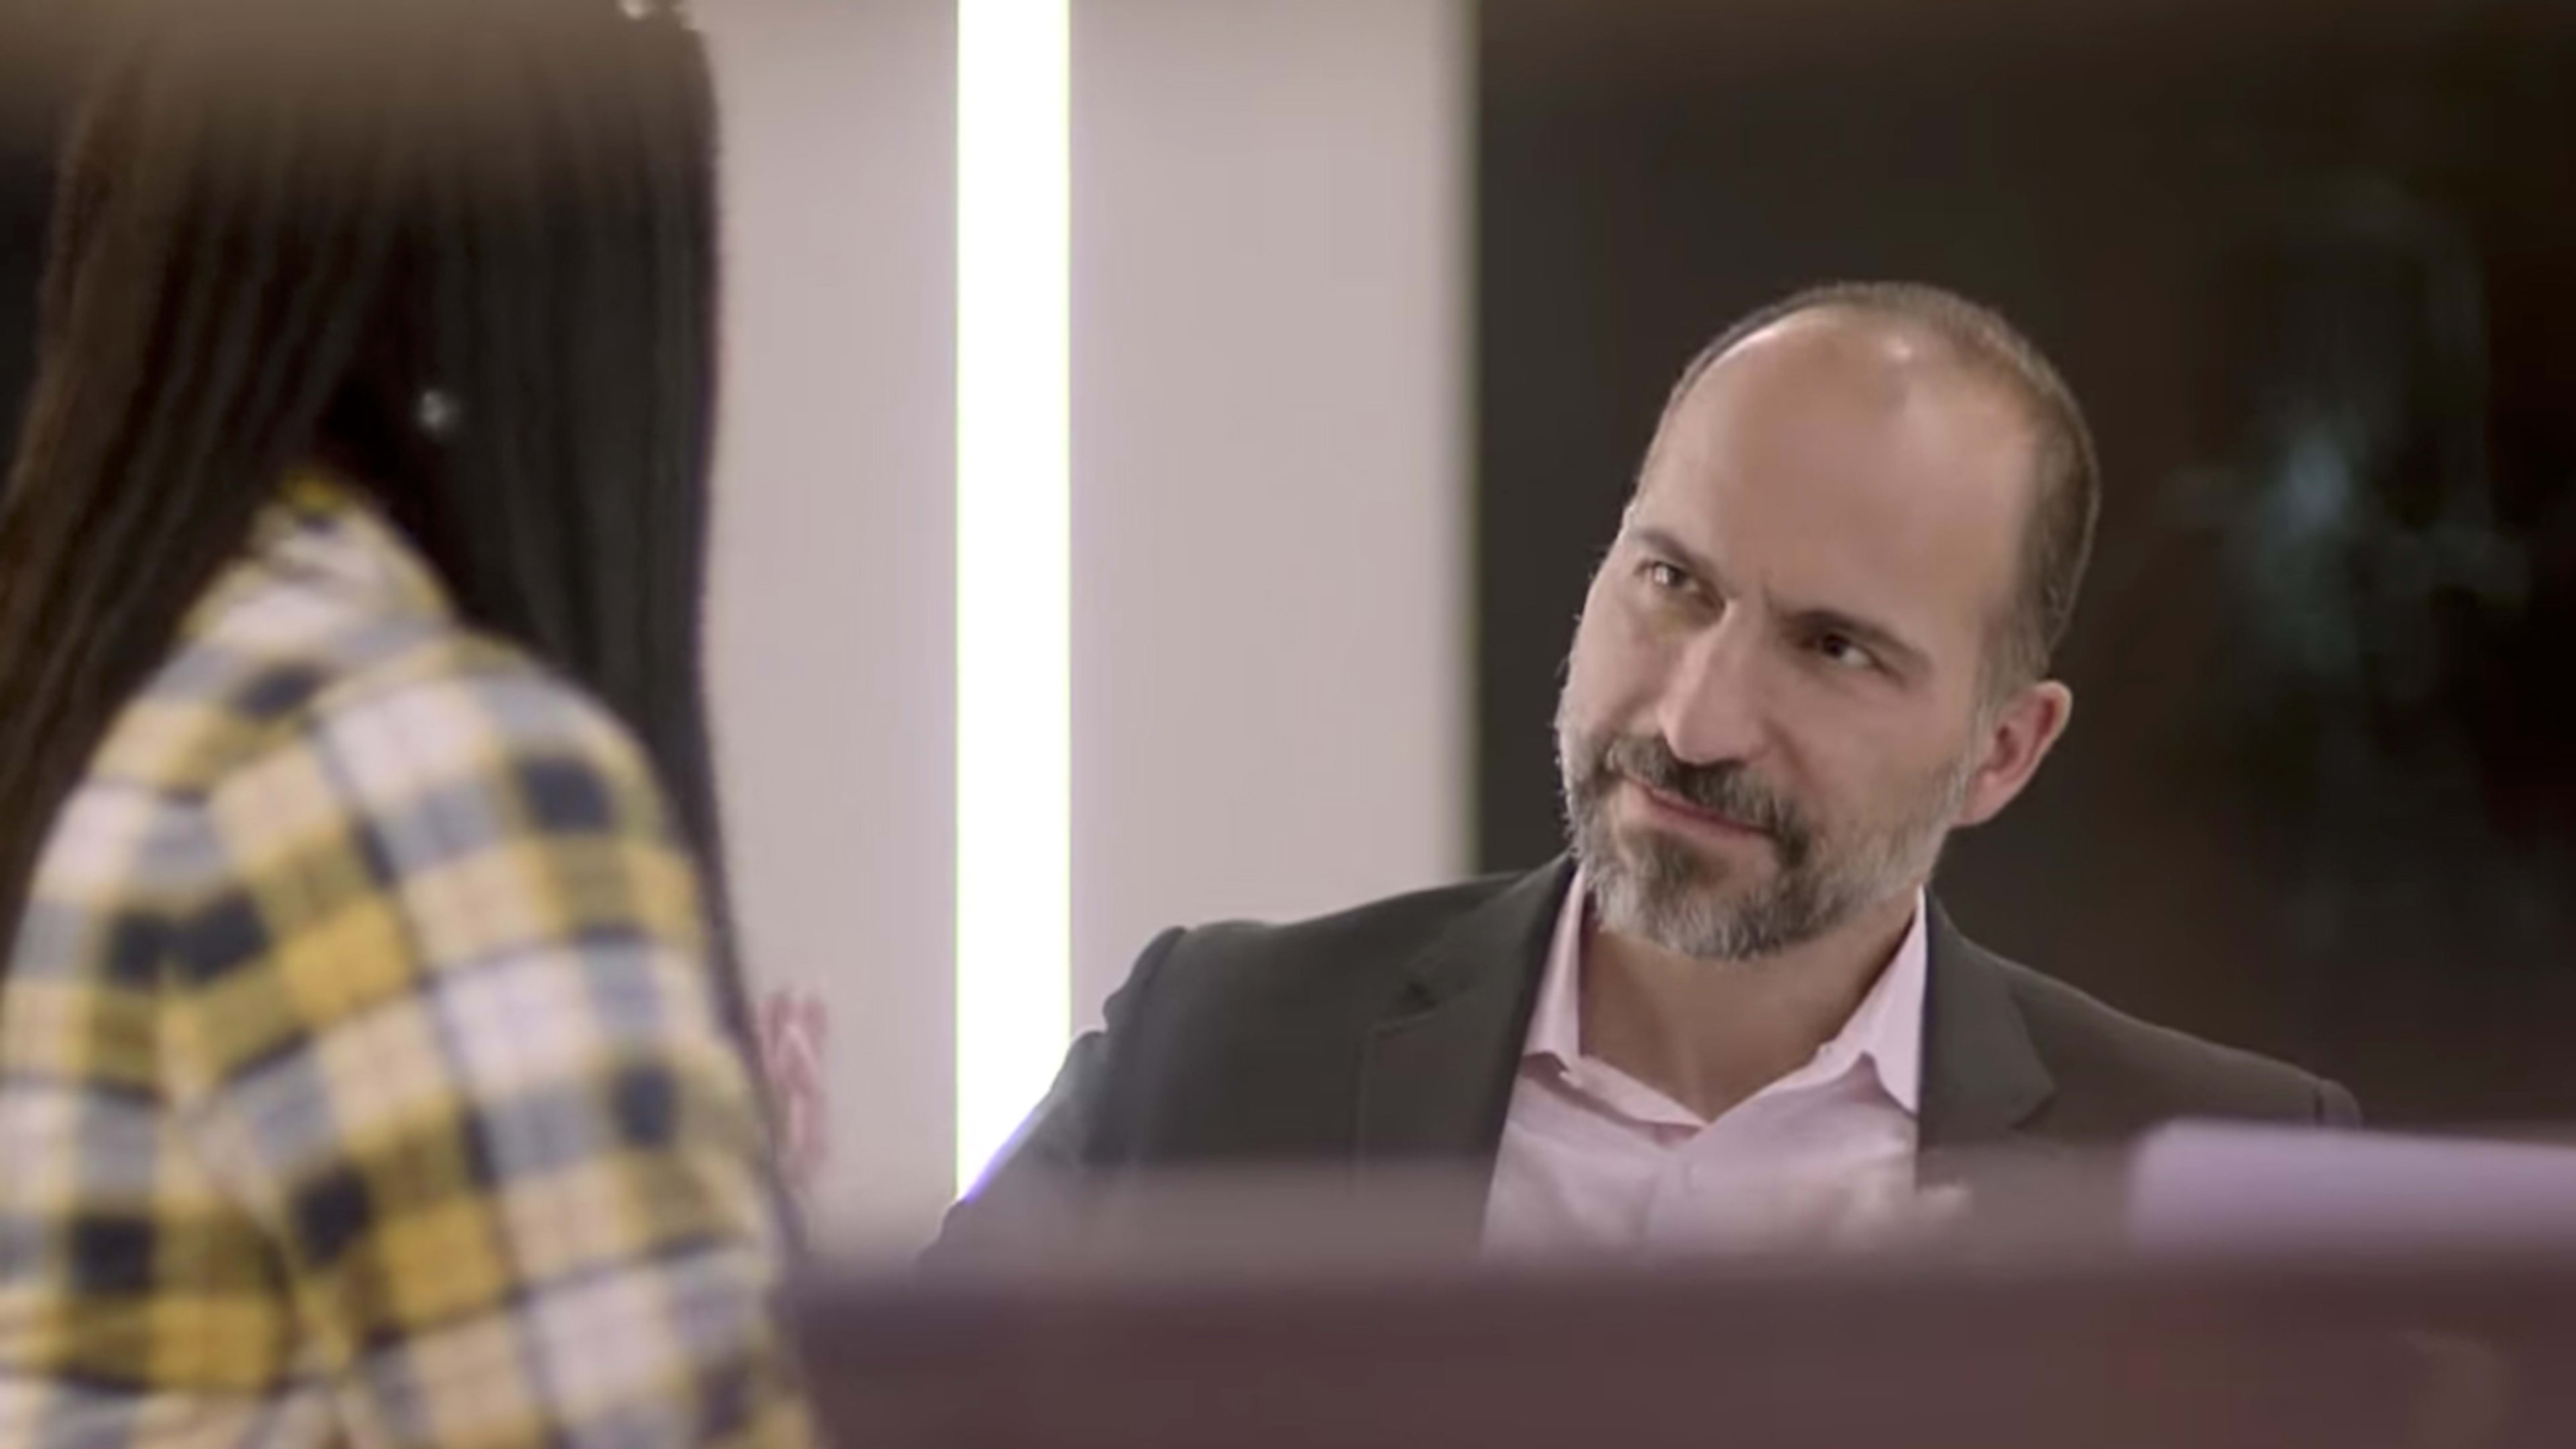 Uber is airing TV ads with its CEO to help improve its reputation